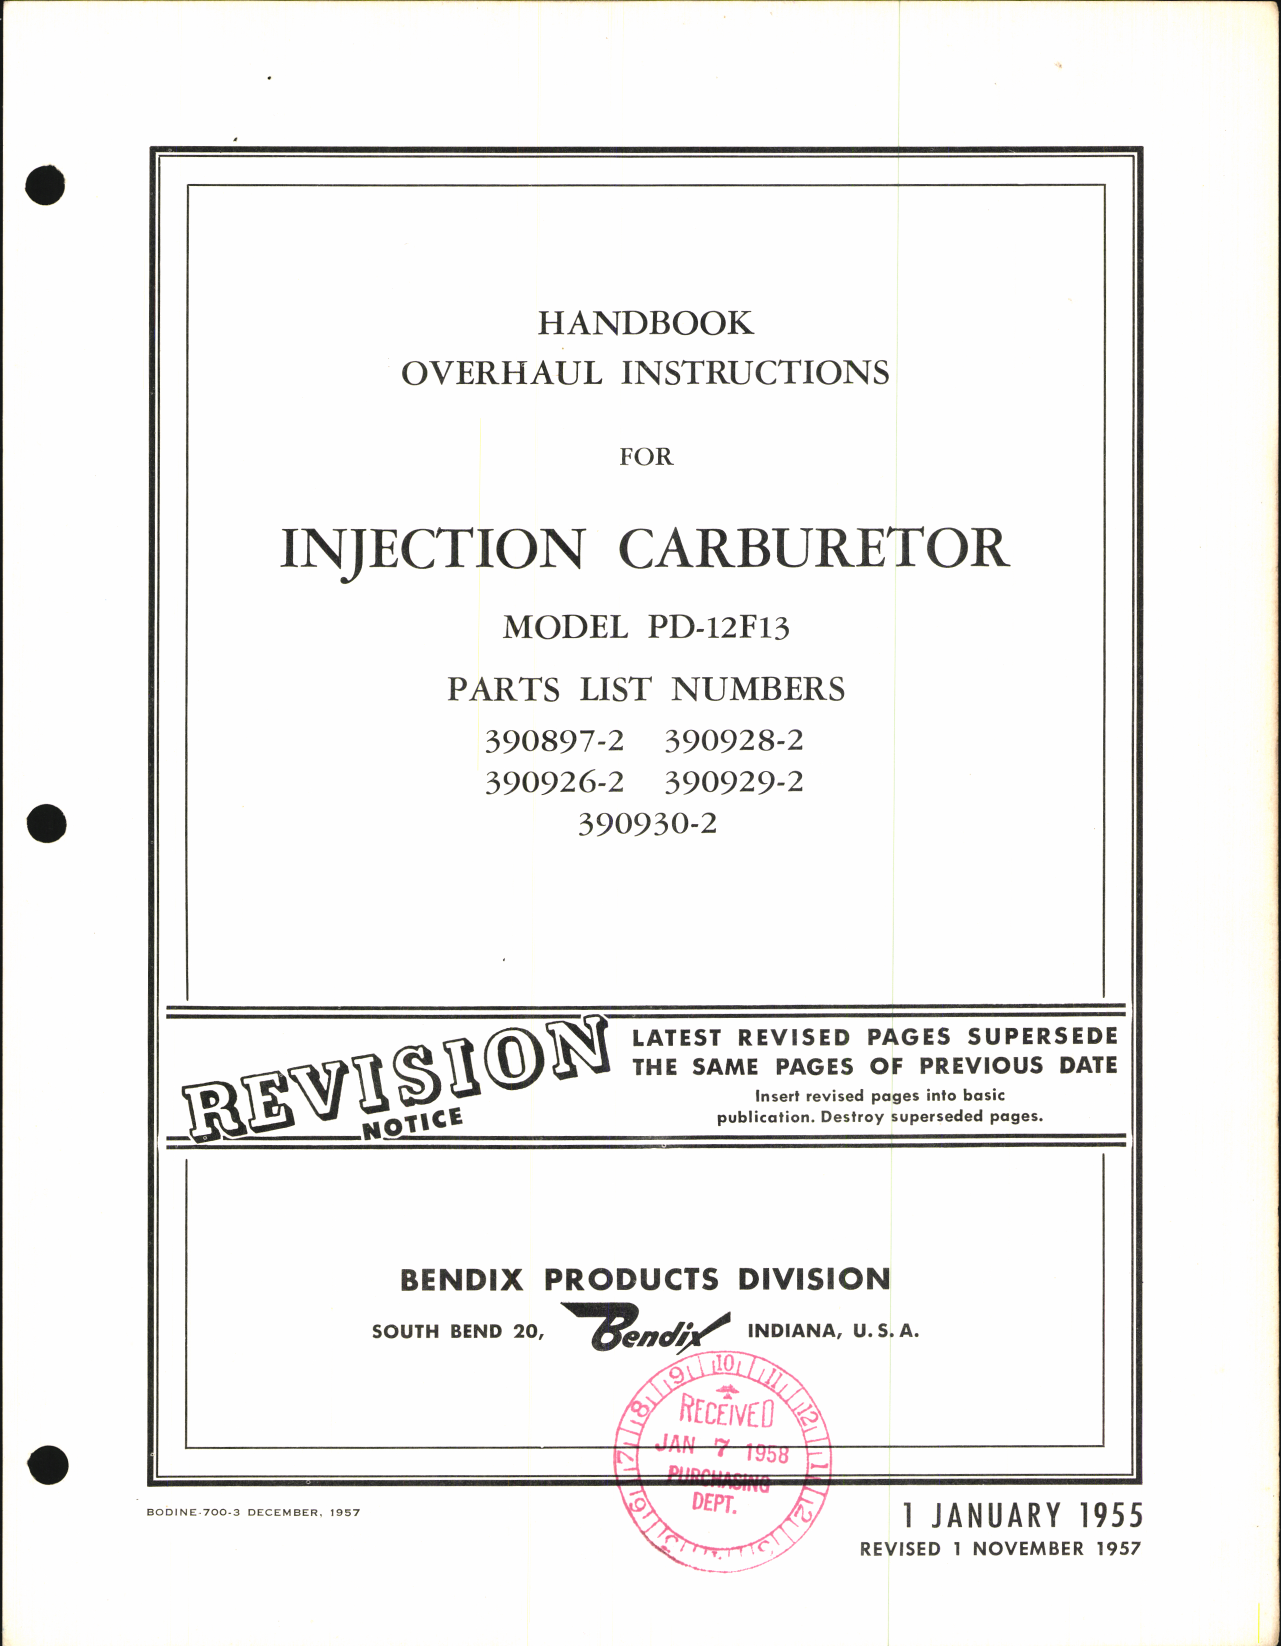 Sample page 5 from AirCorps Library document: Service Manual for Stromberg Injection Carburetor Model PD-12F13